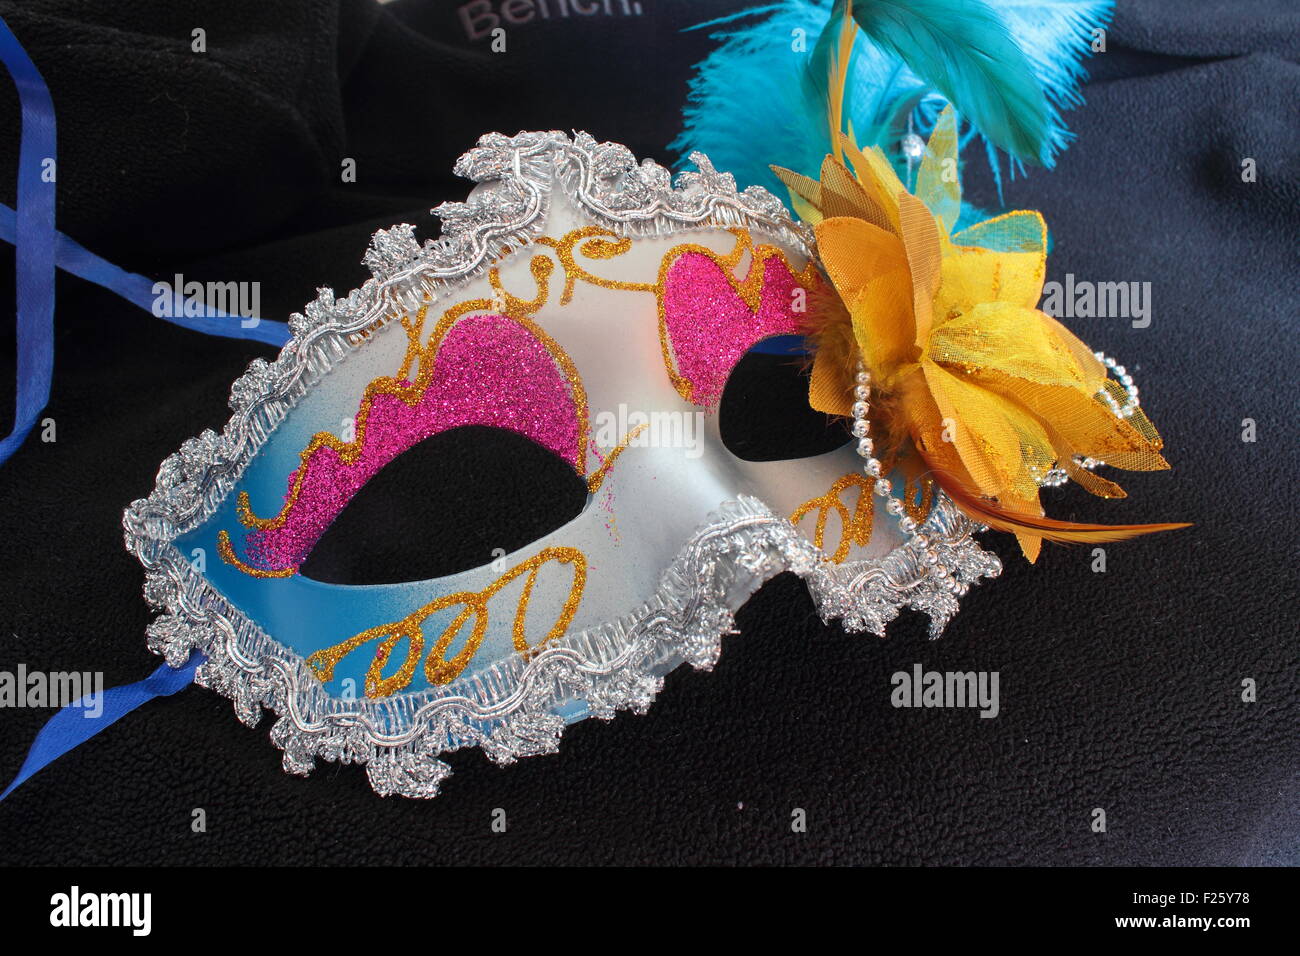 Mask with masquerade decorations Stock Photo - Alamy